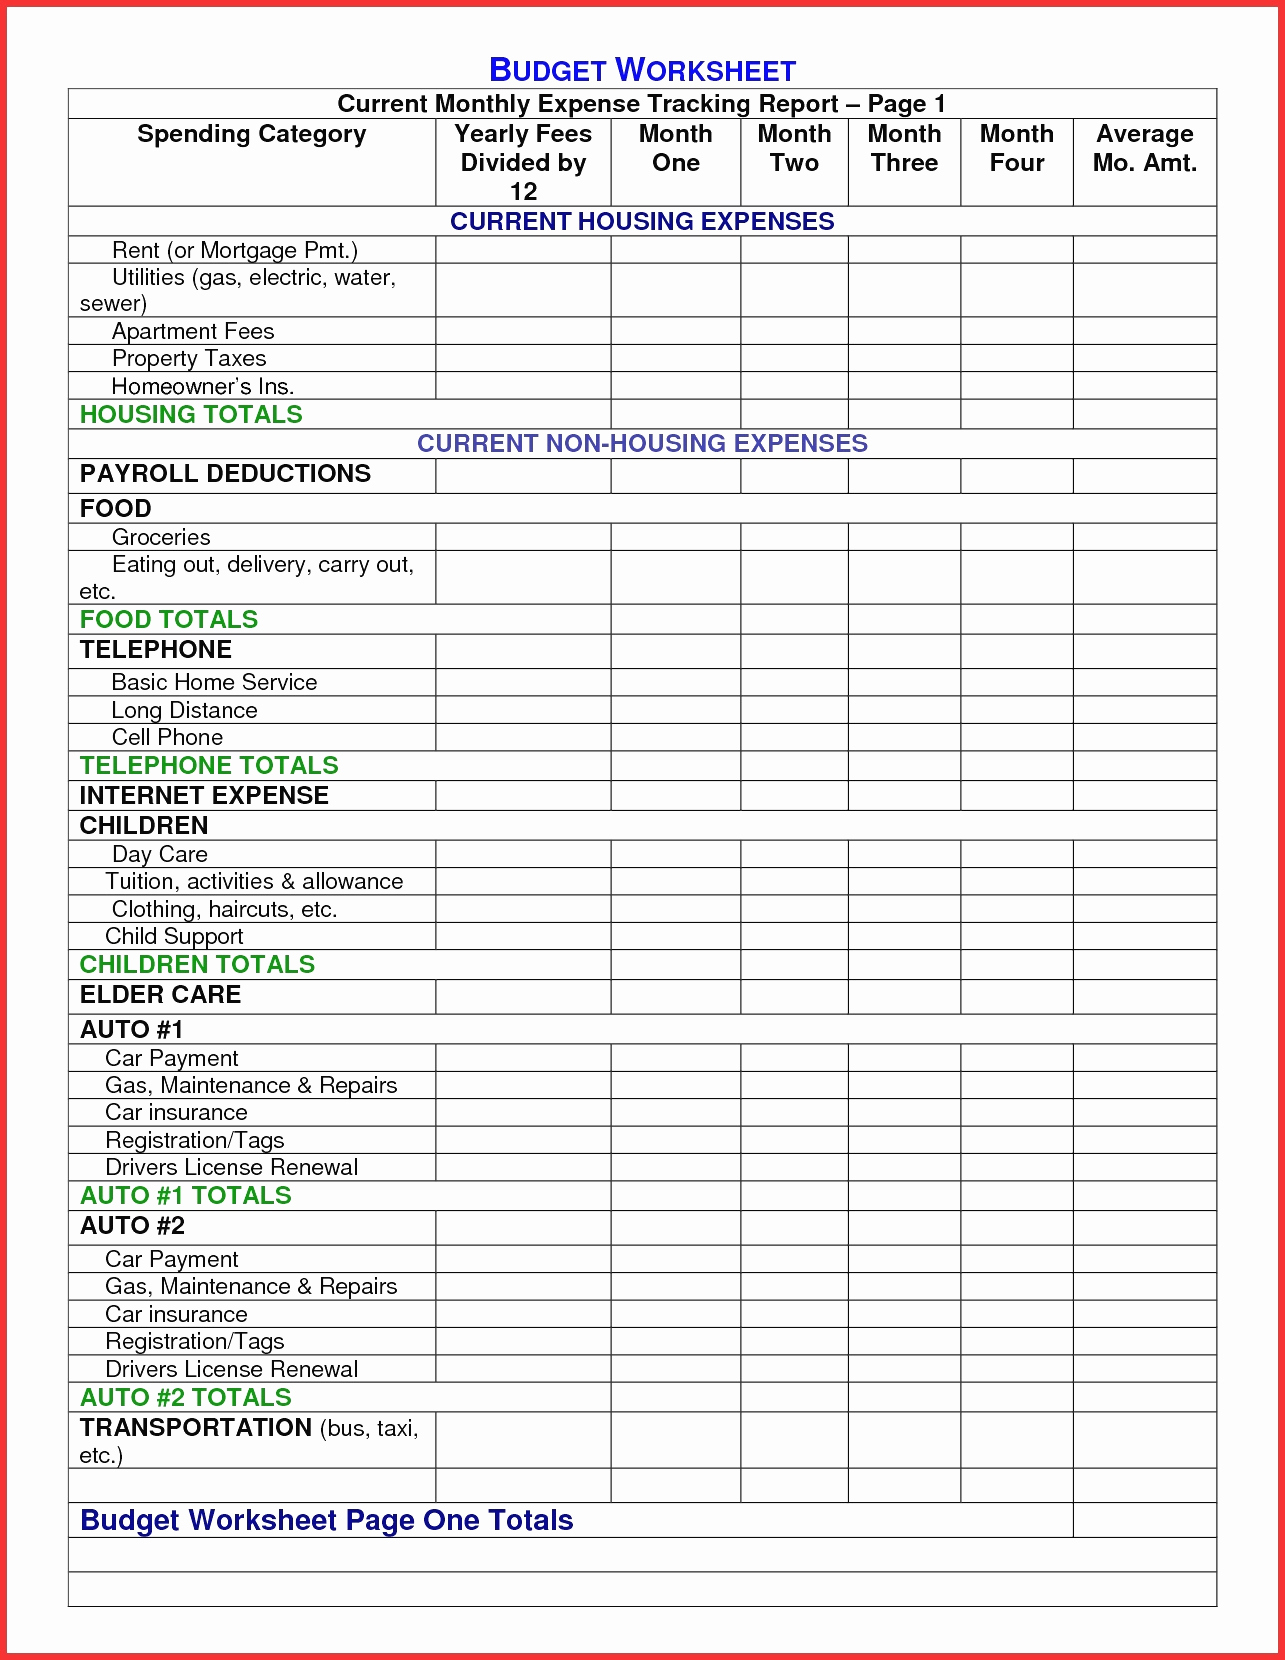 real-estate-expenses-spreadsheet-for-real-estate-agent-expense-tracking